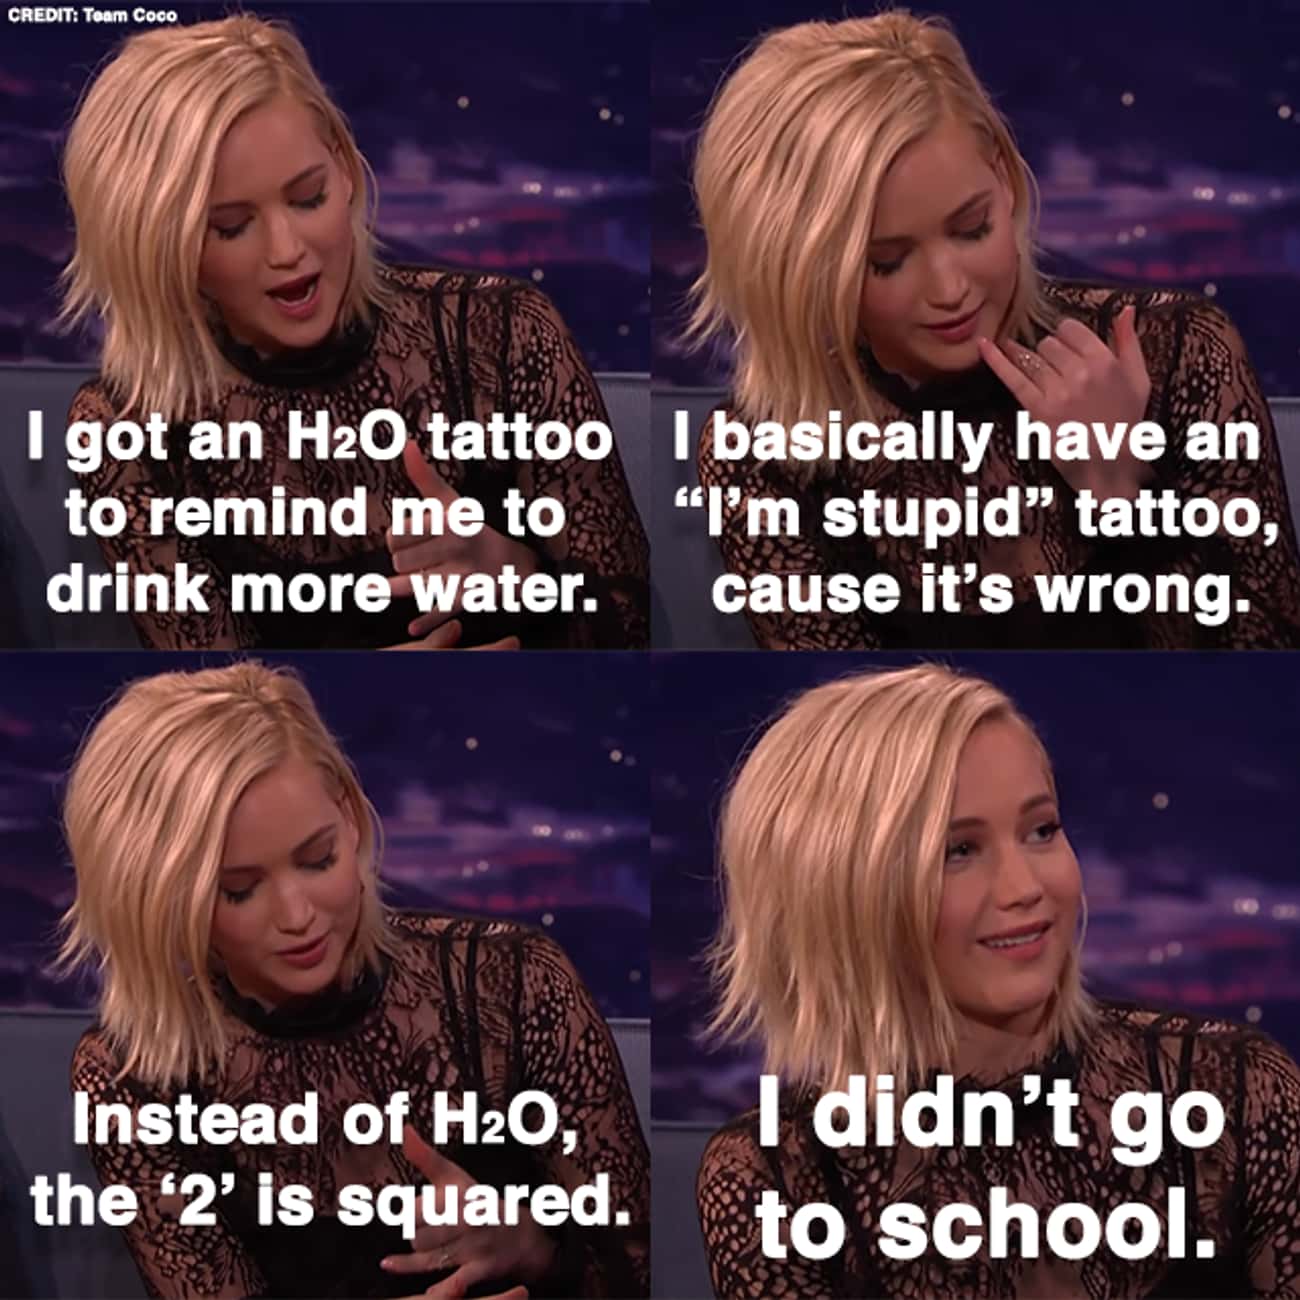 Jennifer Has An 'H2O' Tattoo That Is Formatted Incorrectly